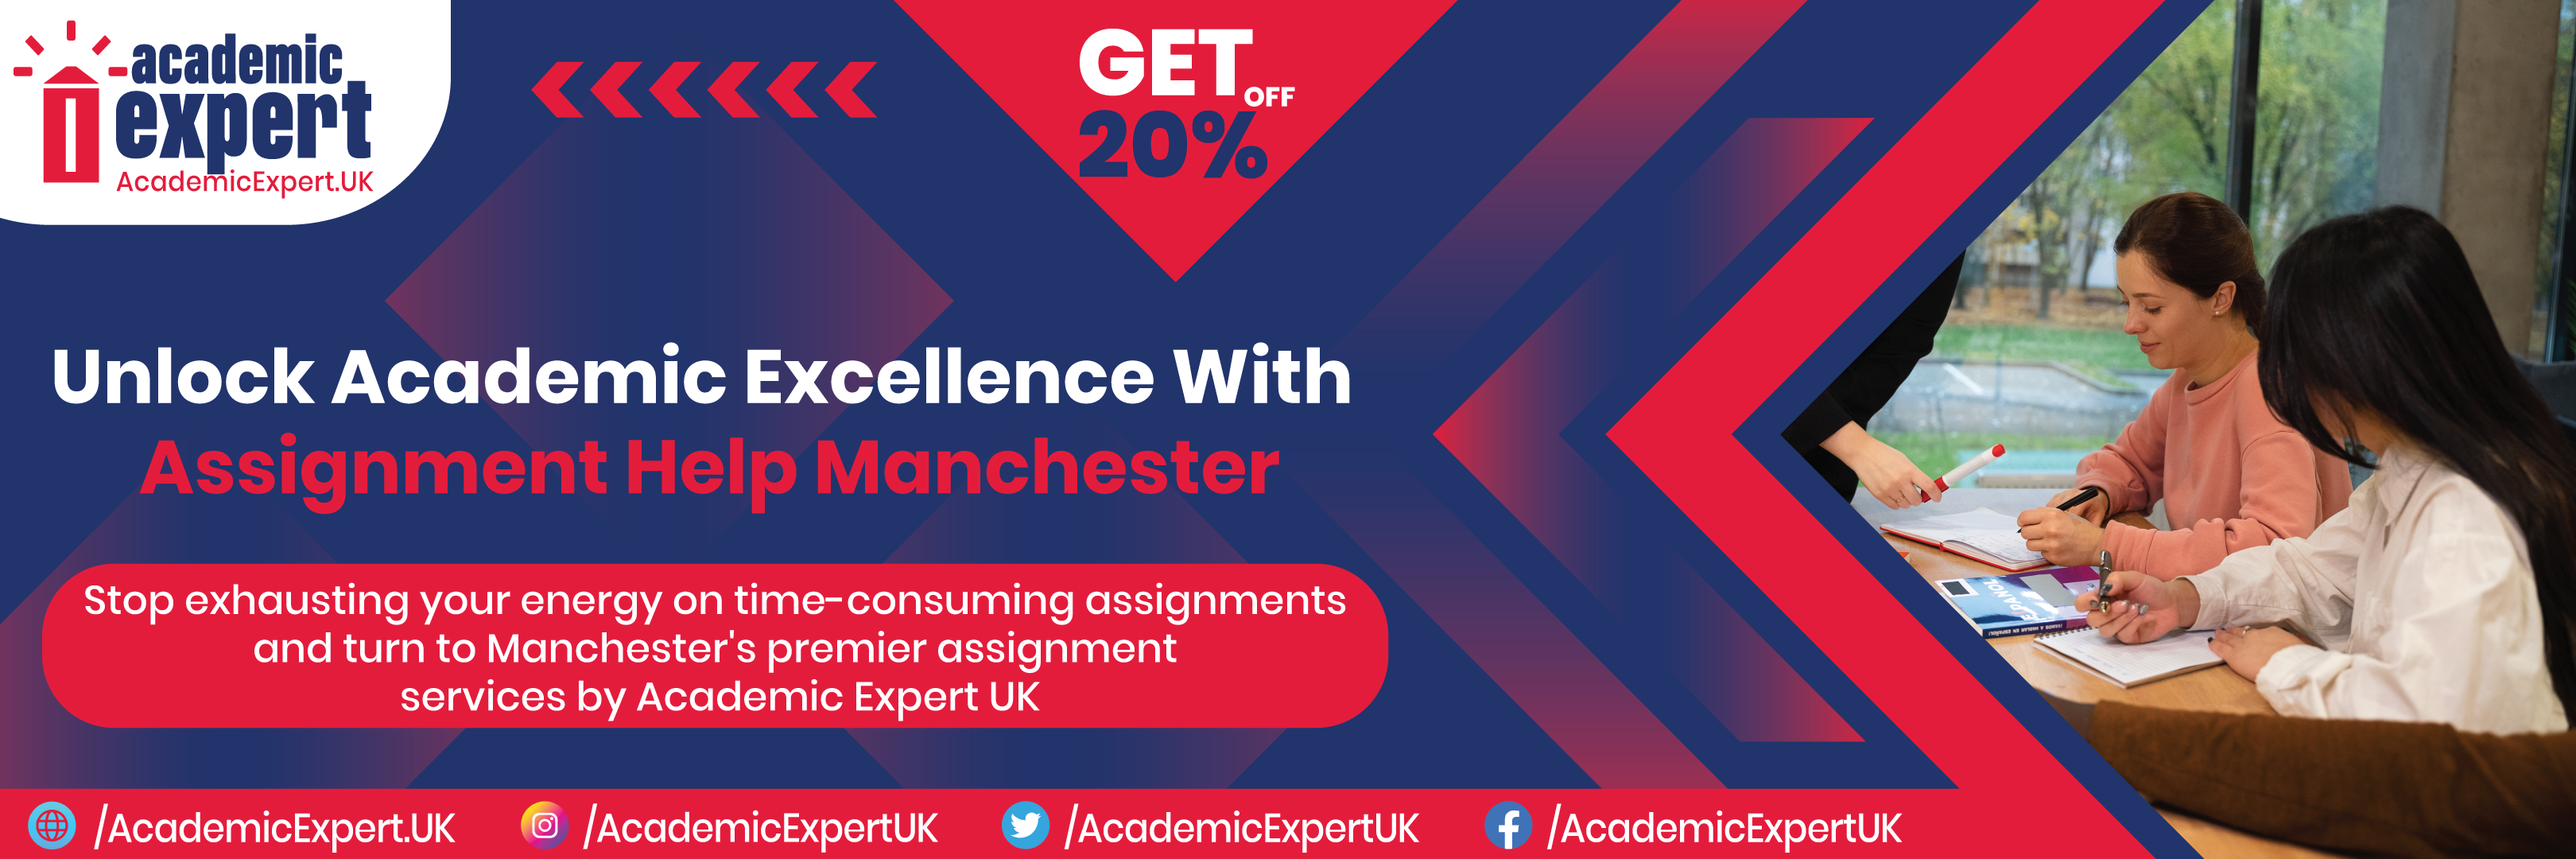 Unlock Academic Excellence With Assignment Help Manchester